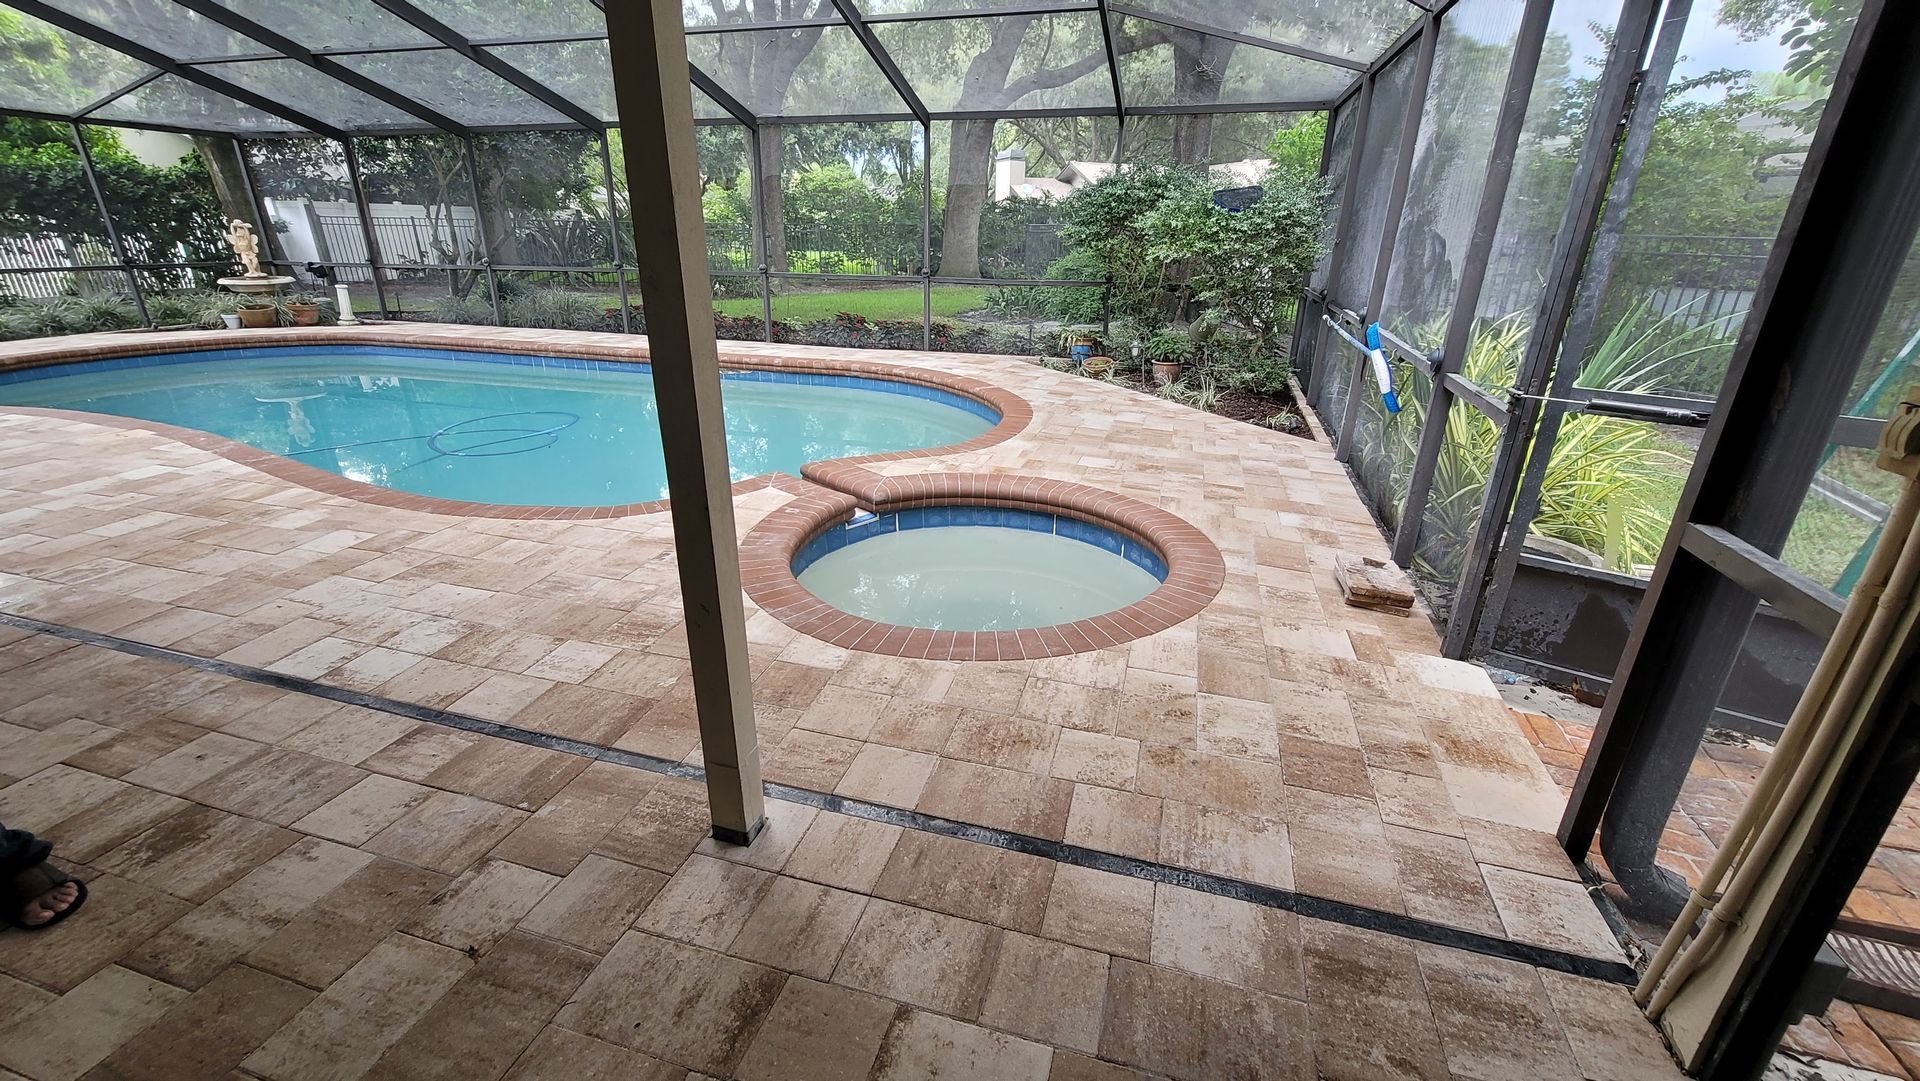 Flagstone - Victory in White/Tan with Tan coping. Brick paver pool deck in Tampa, FL